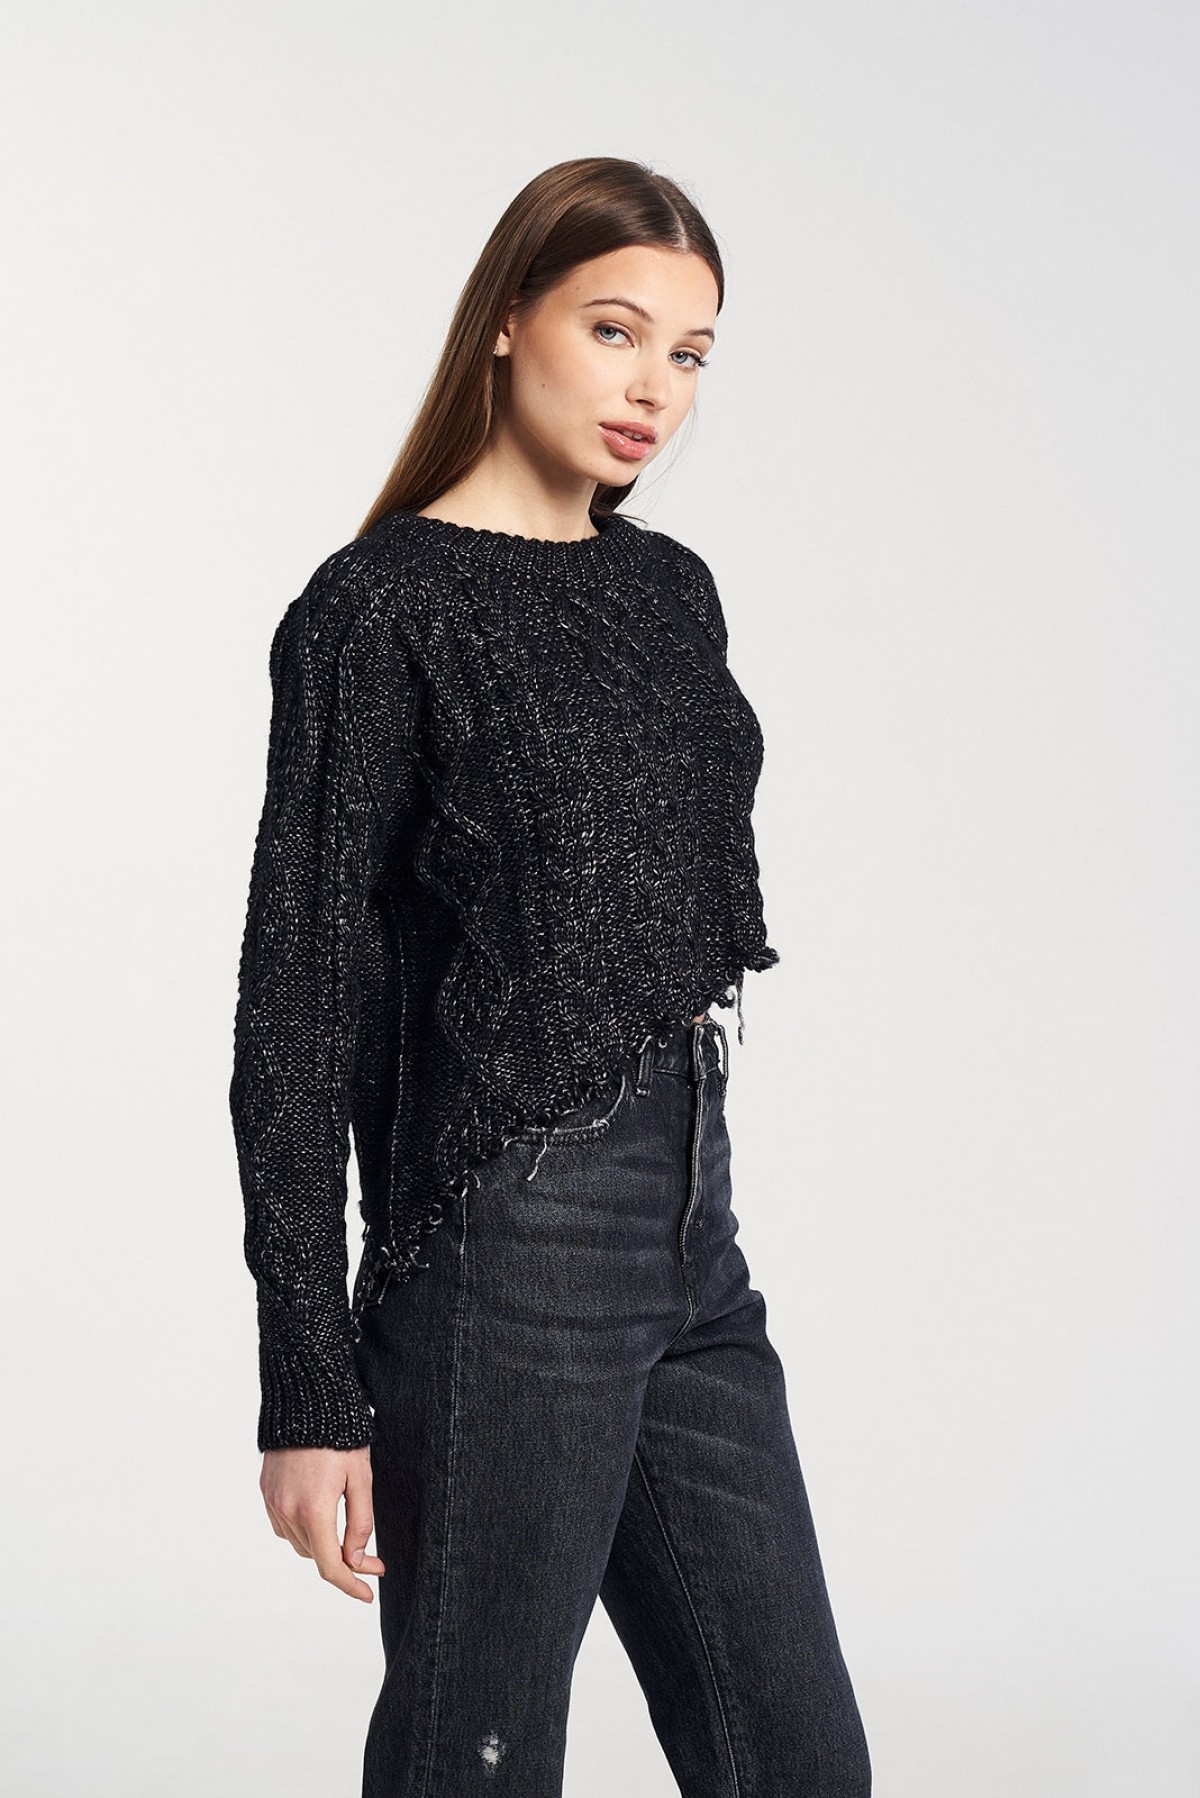 CHRISTELLE NIMA ASYMMETRIC CHUNKY RECYCLED POLYESTER JUMPER IN BLACK